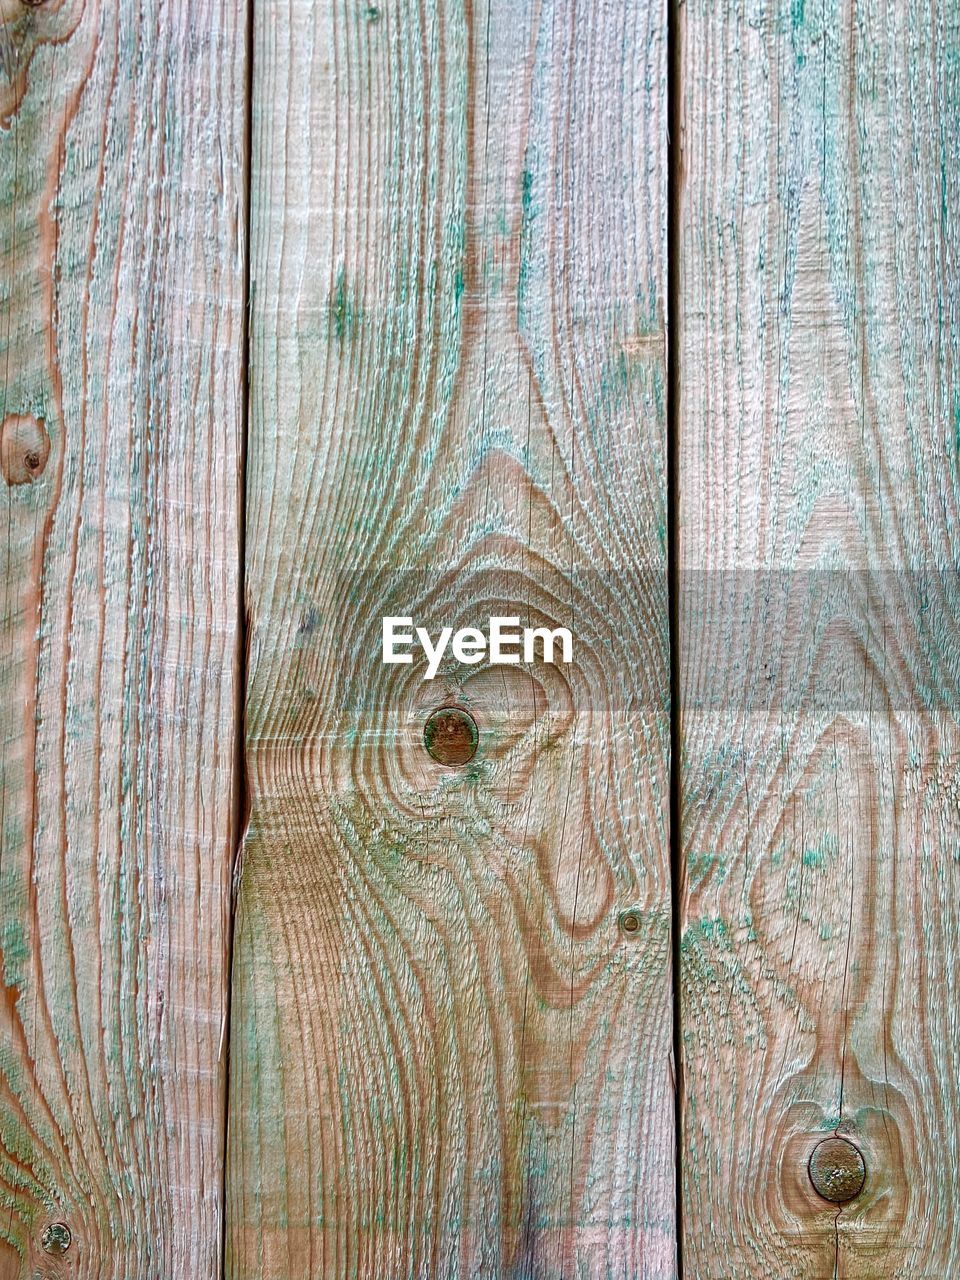 wood, full frame, backgrounds, pattern, textured, close-up, no people, wood grain, plank, flooring, brown, day, tree, green, weathered, rough, leaf, outdoors, old, wall, floor, timber